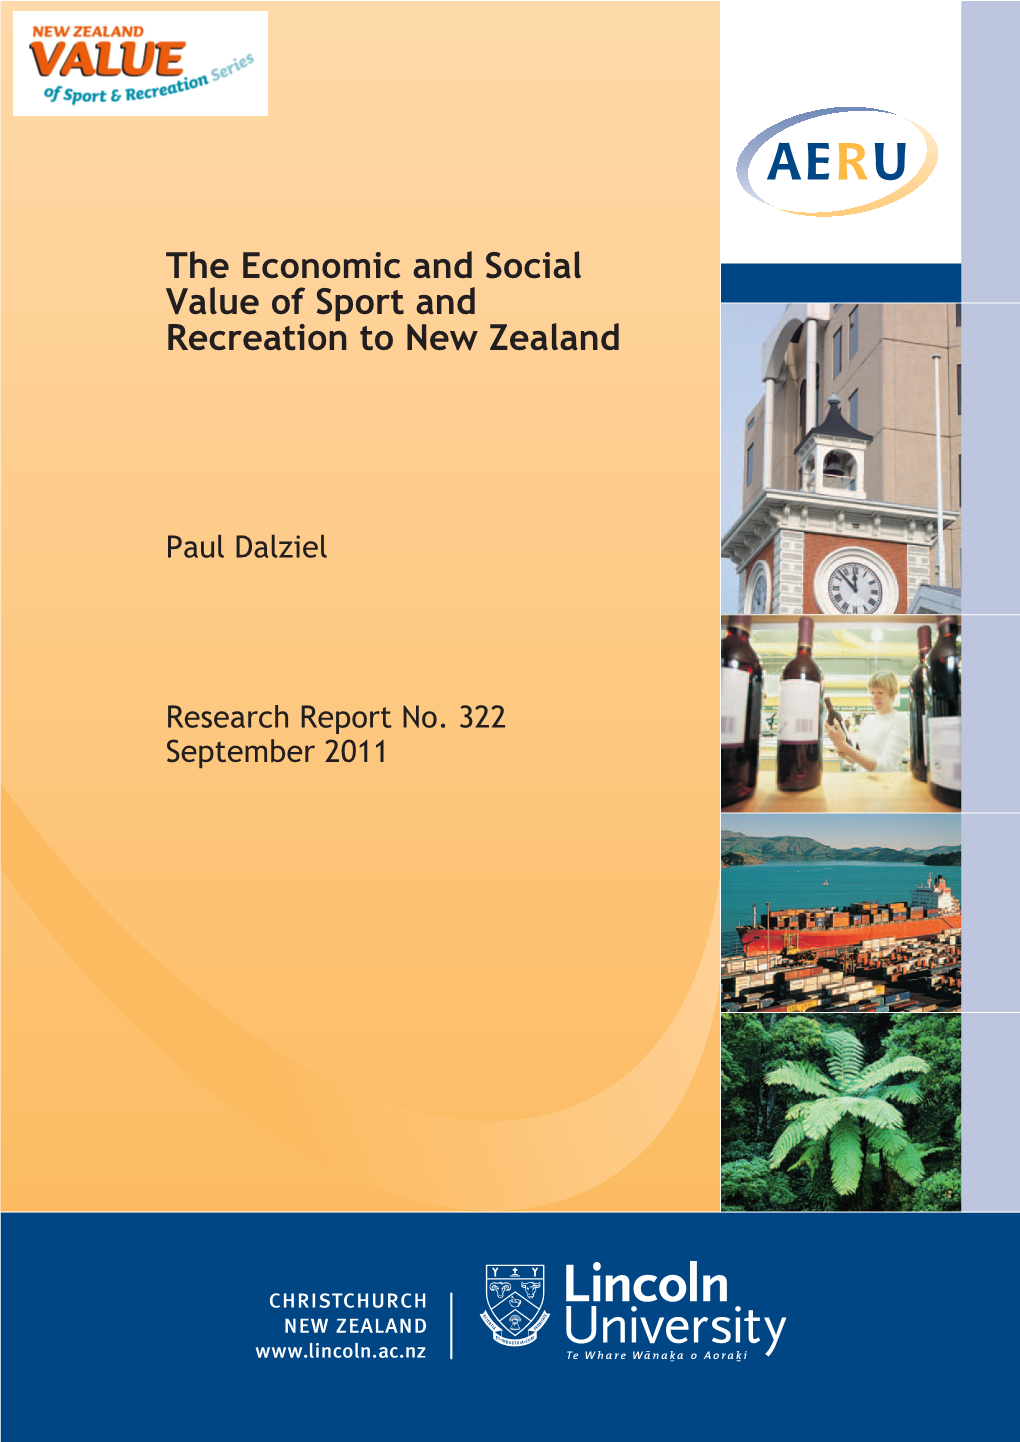 The Economic and Social Value of Sport and Recreation to New Zealand